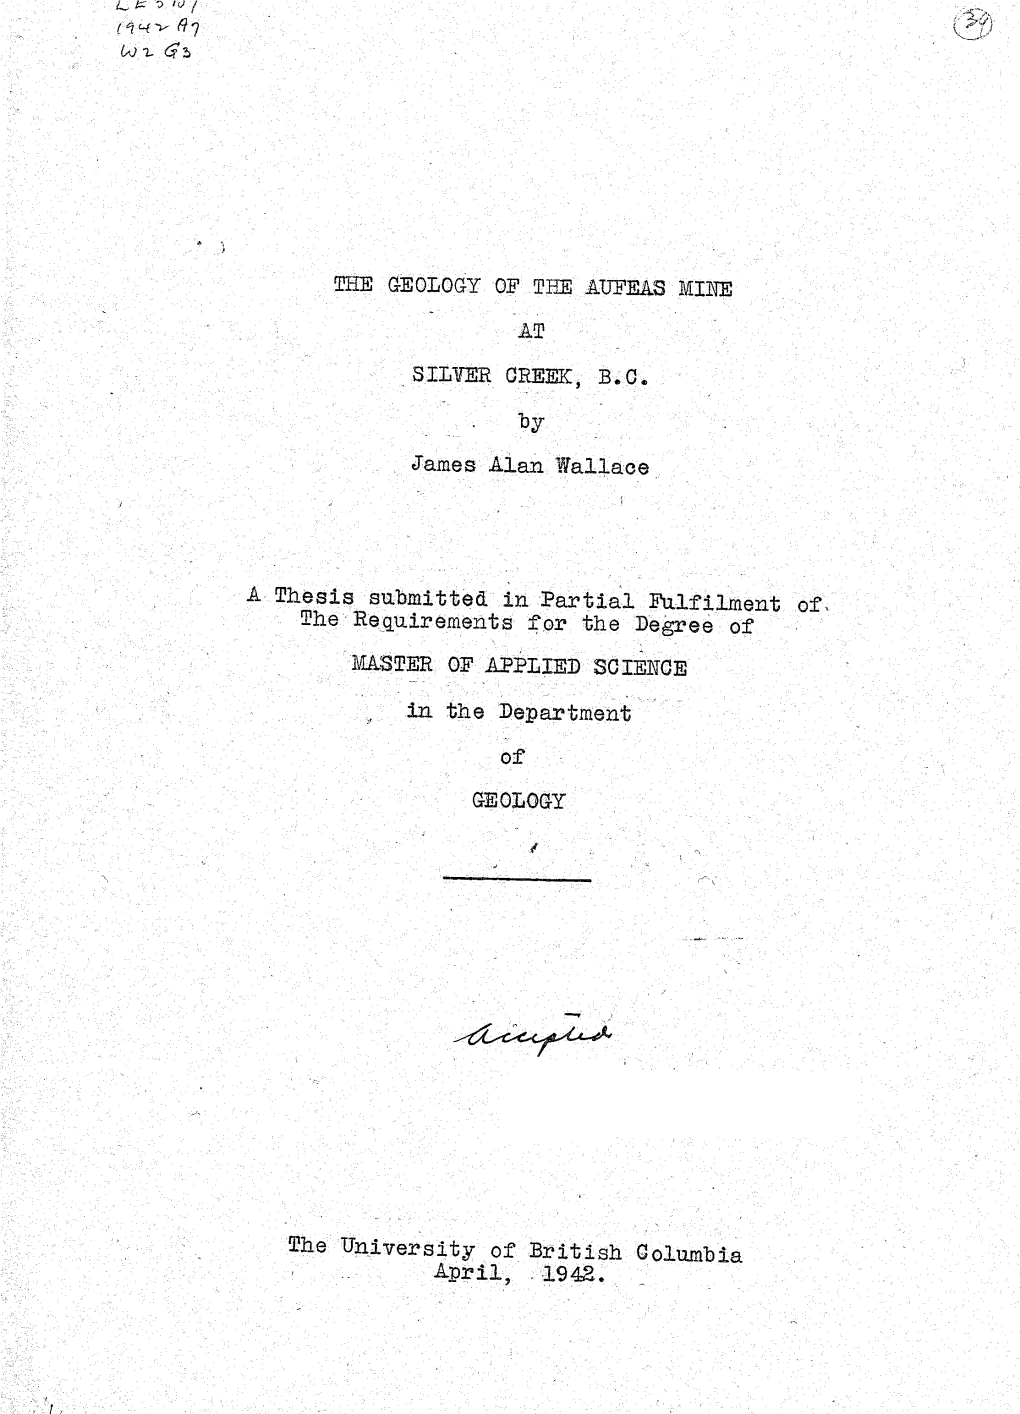 THE GEOLOGY of the AUFEA3 MINE at SILVER GREEK, B.C. James Alan Wallace Thesis Submitted in Partial Fulfilment the Requirements